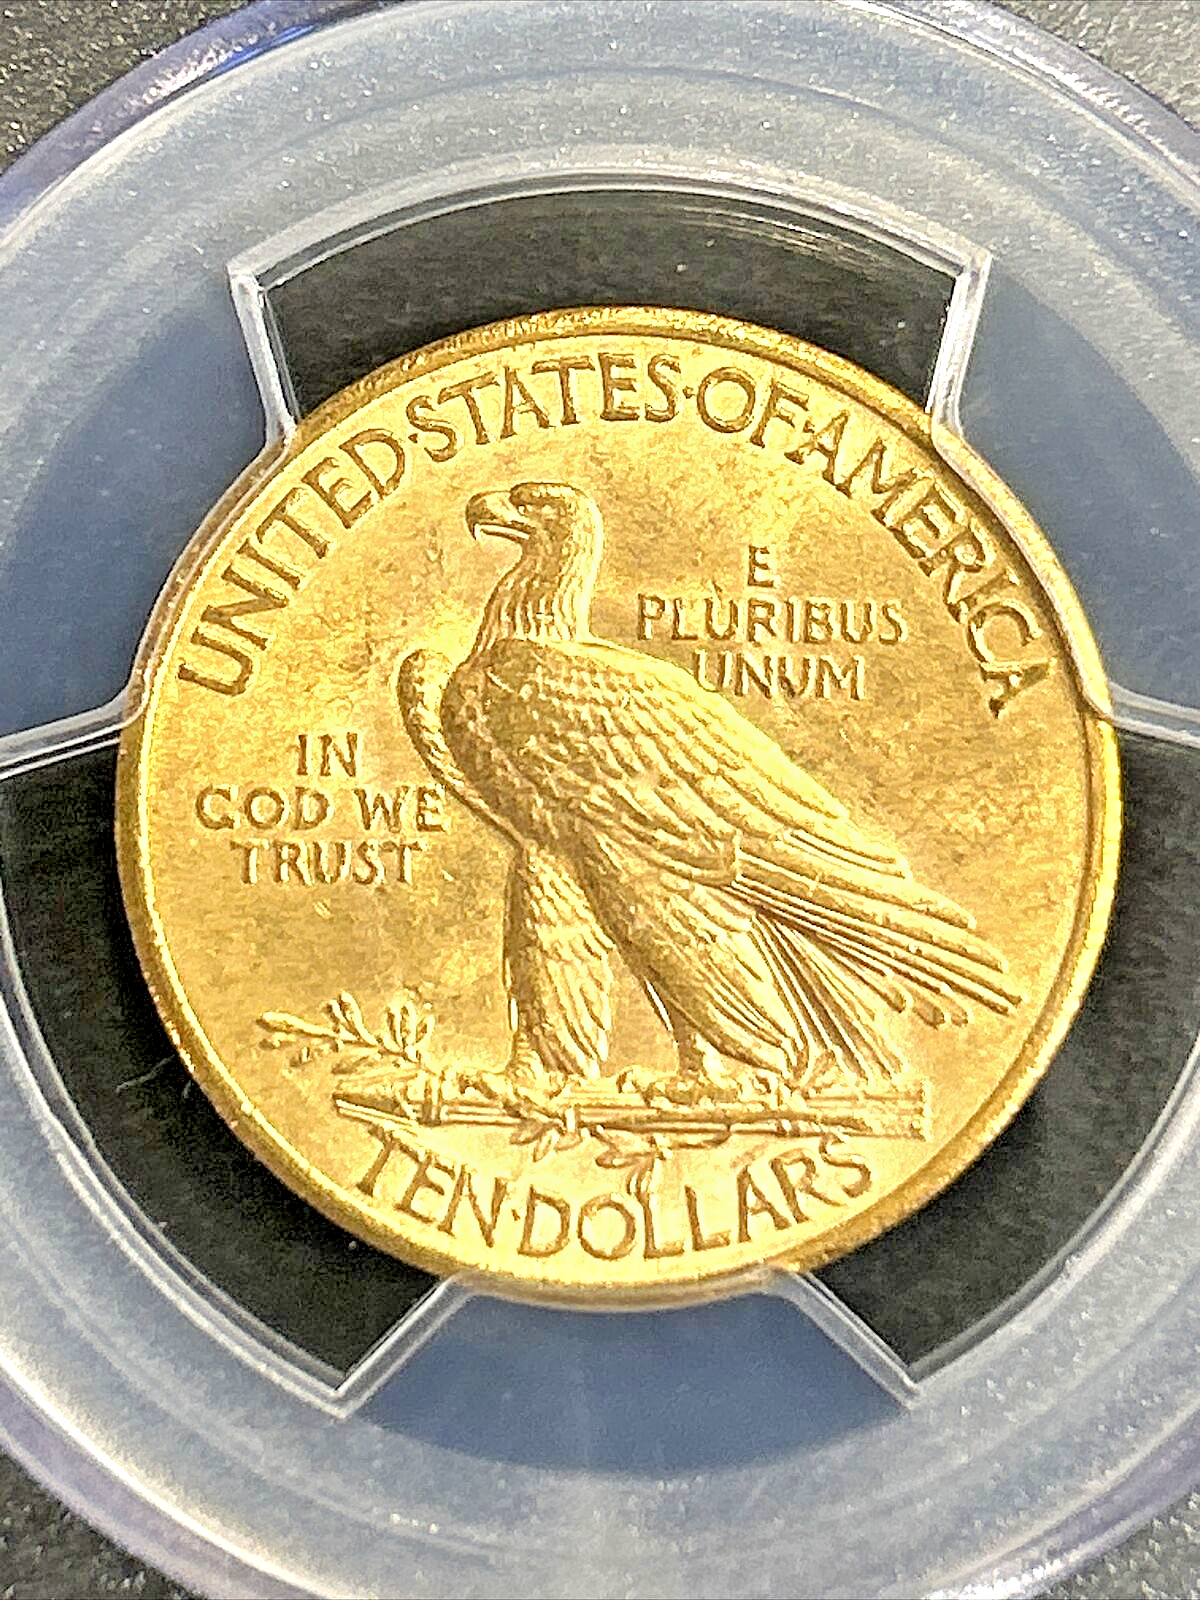 1926 $10 Gold Indian MS63 PCGS